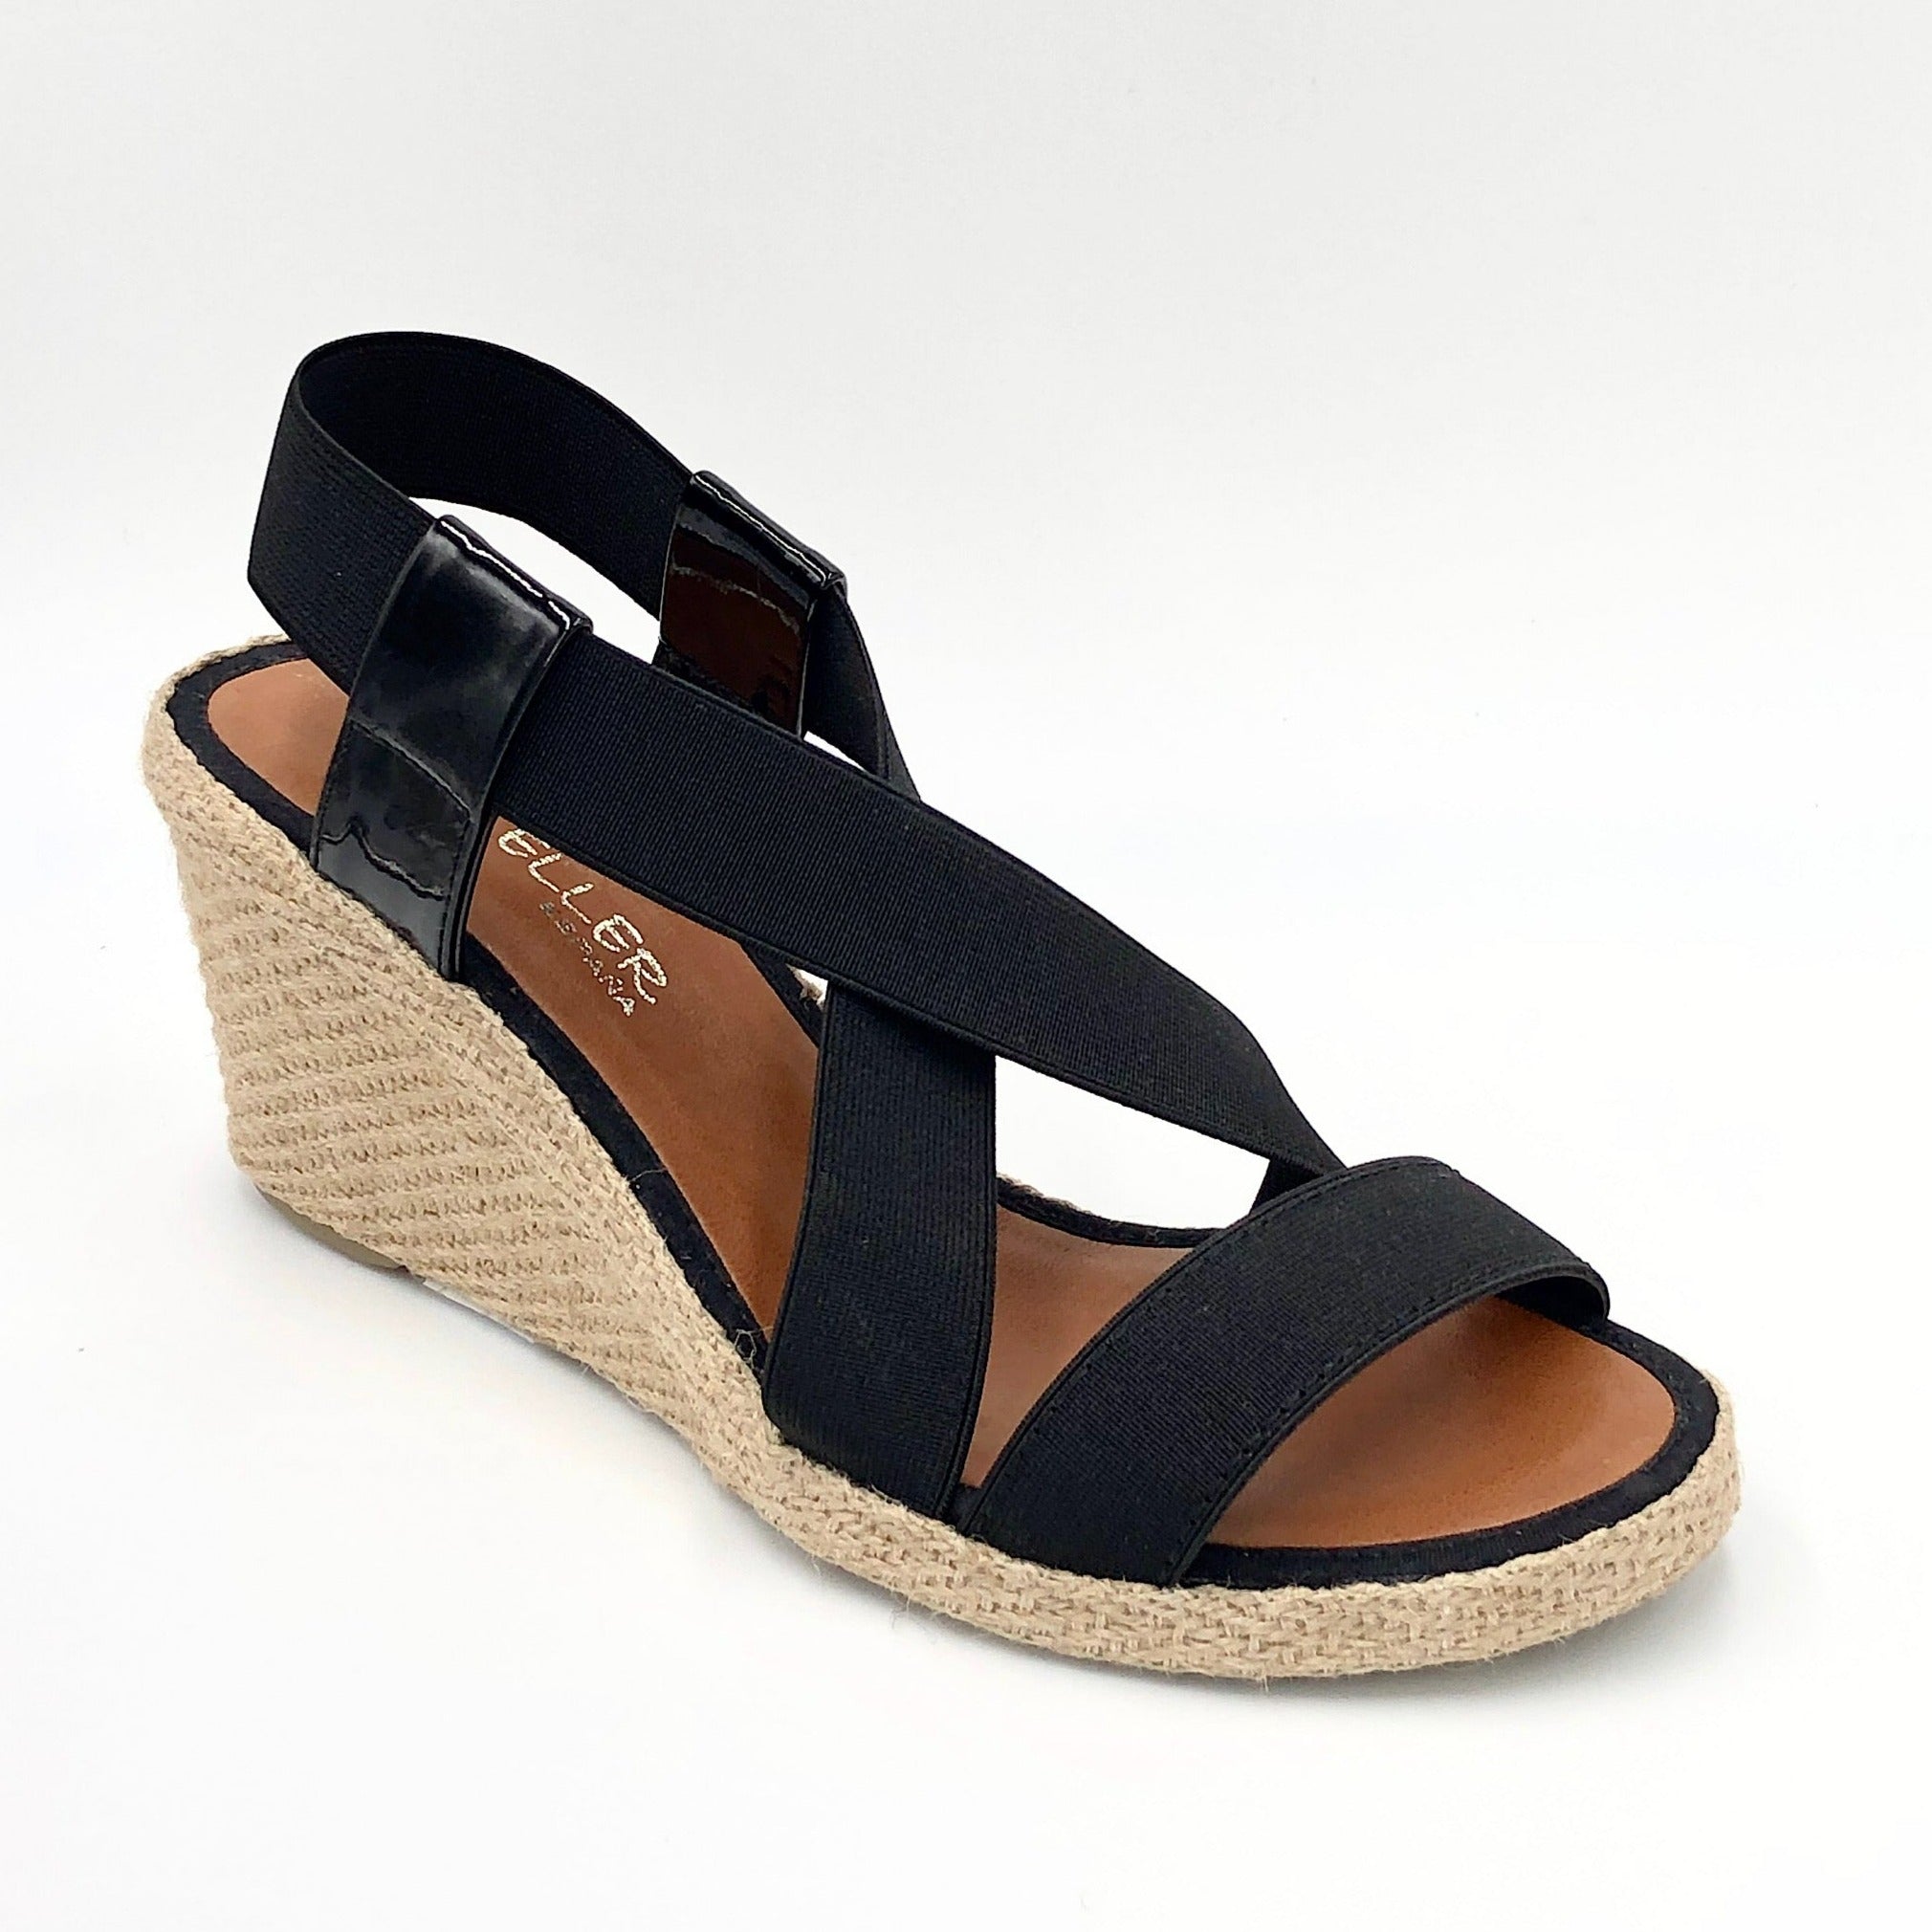 Casteller 30010 - The Elastic Espadrille Sandal in Black. Go anywhere in this classic top selling elastic espadrille on mid wedge. The elastic upper fits & flatters all types of feet and offers a great deal of comfort.